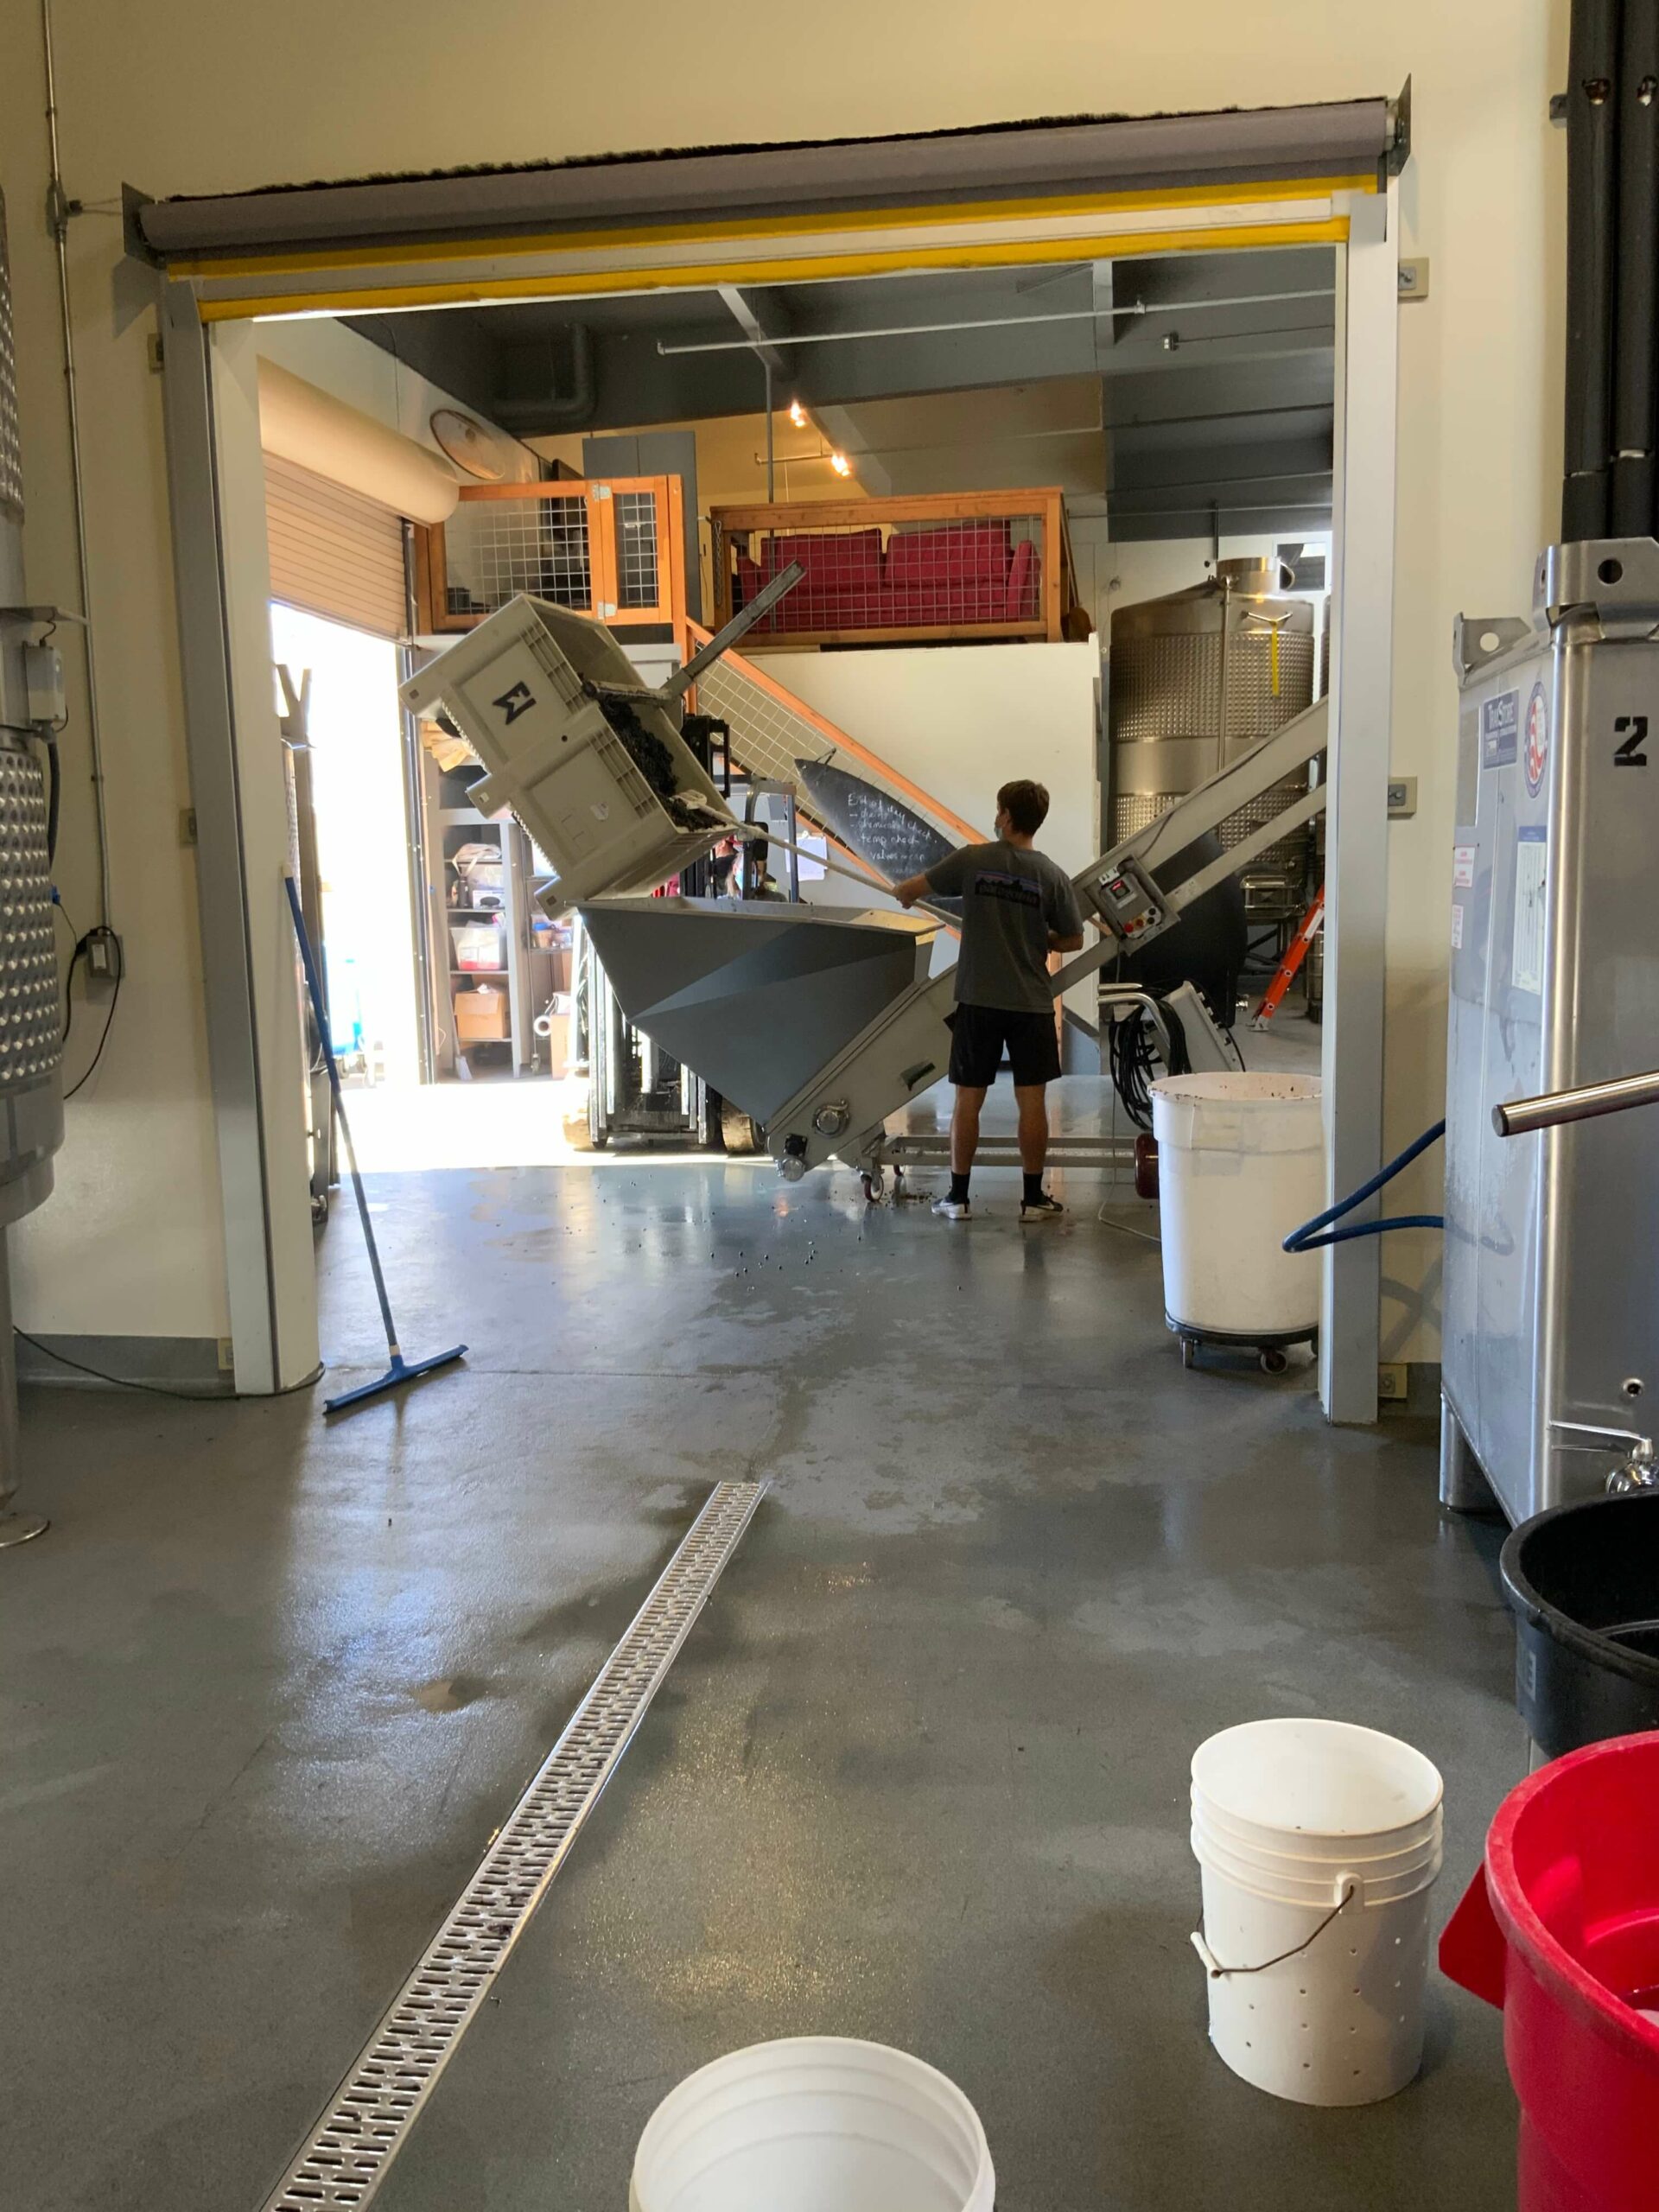 Moving grapes from containers into the sorter